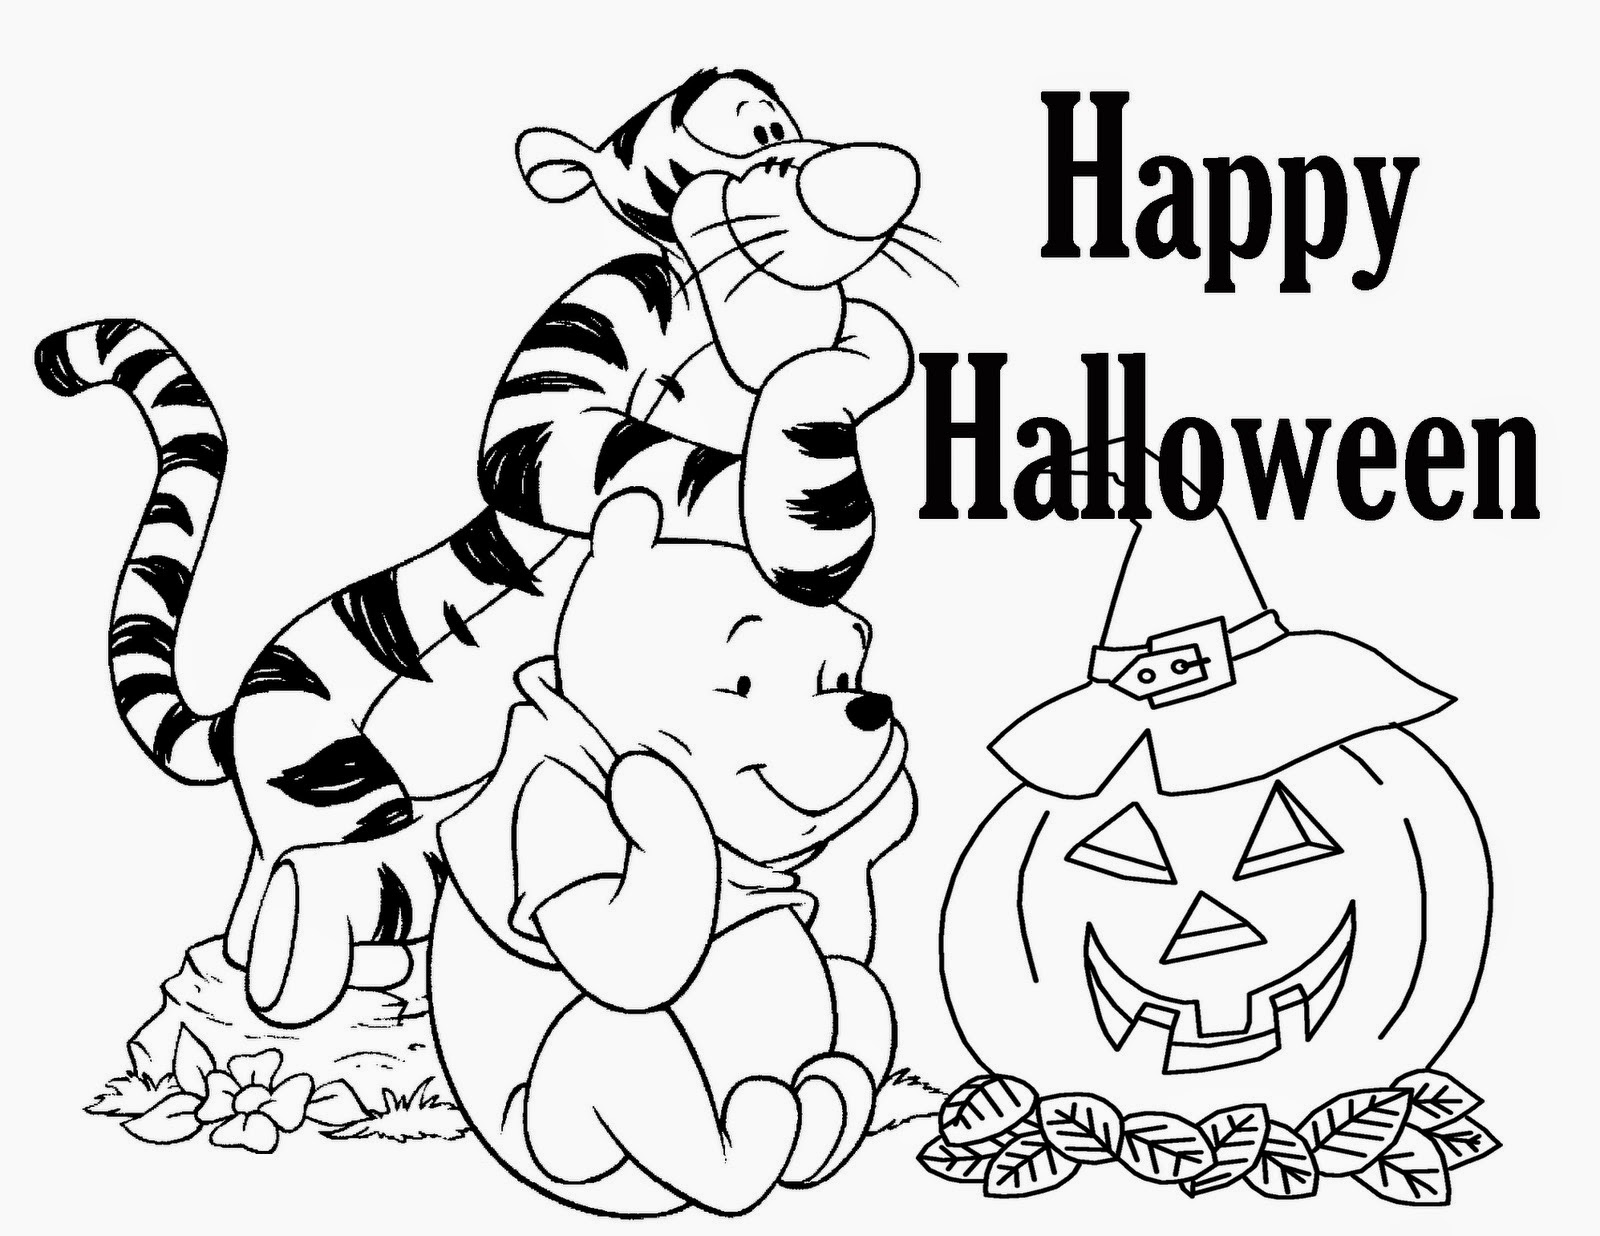 winnie-the-pooh-halloween-coloring-pages